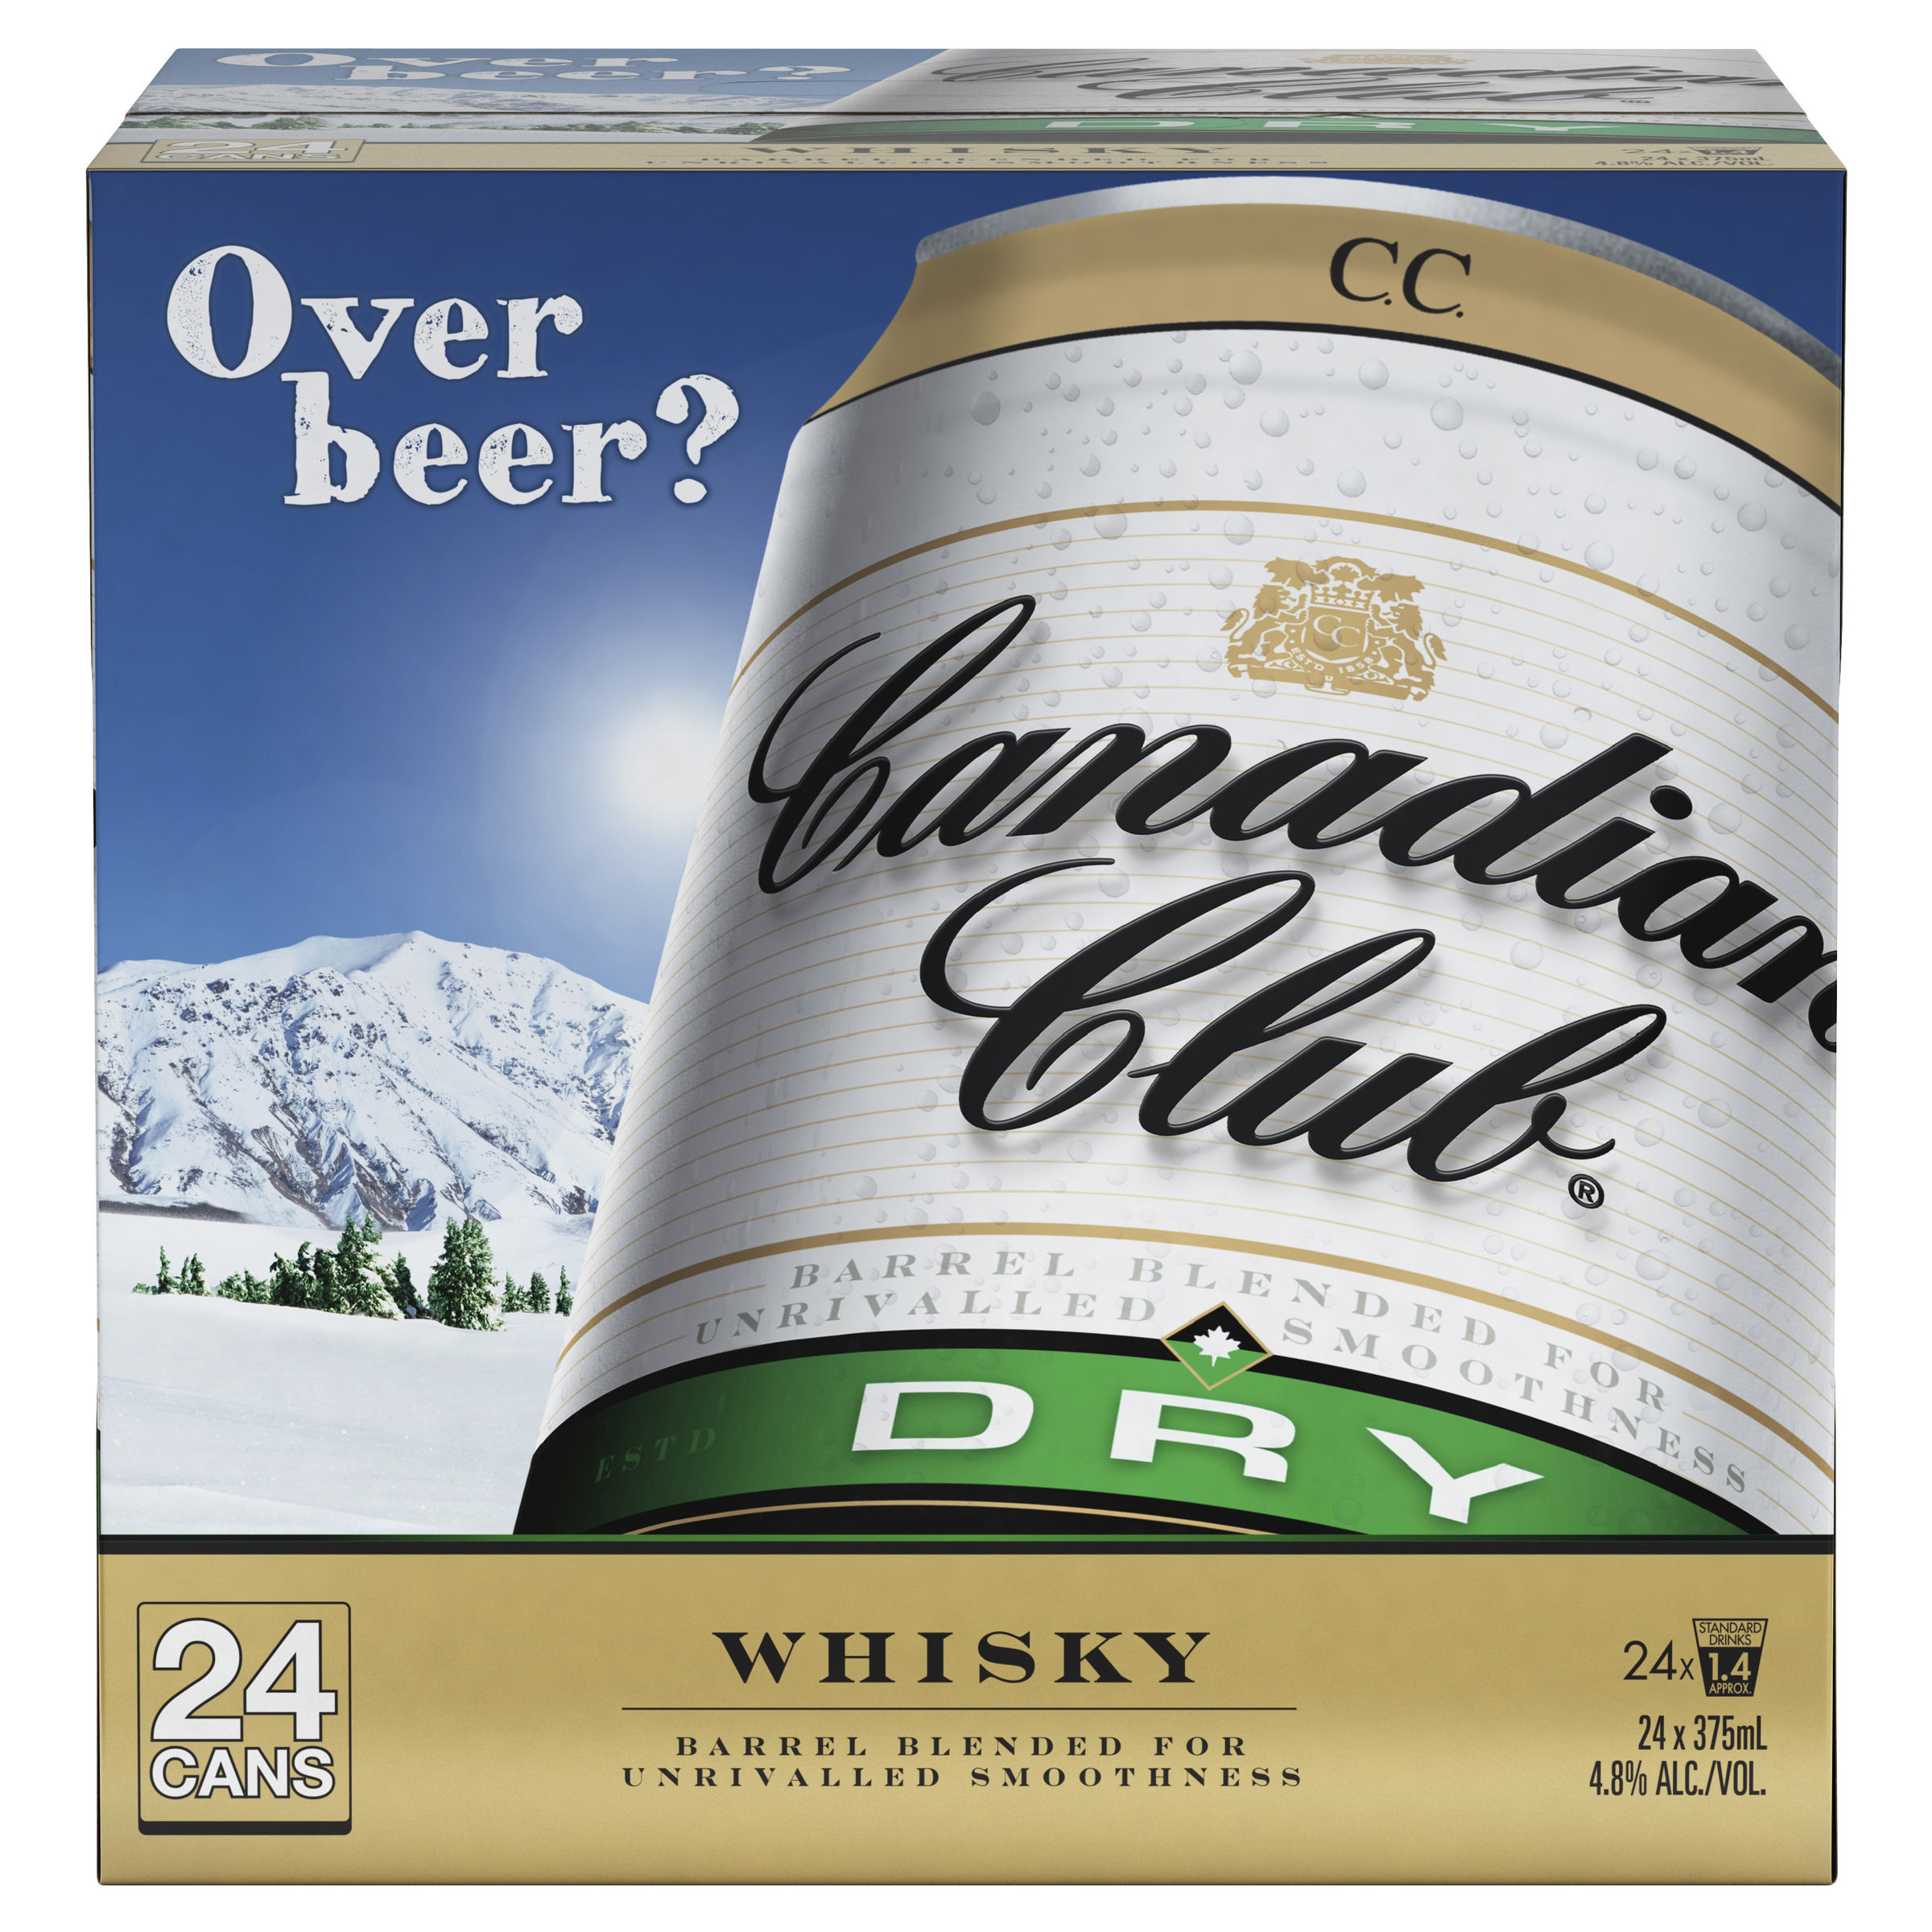 CANADIAN CLUB & DRY CUBE - Value Cellars